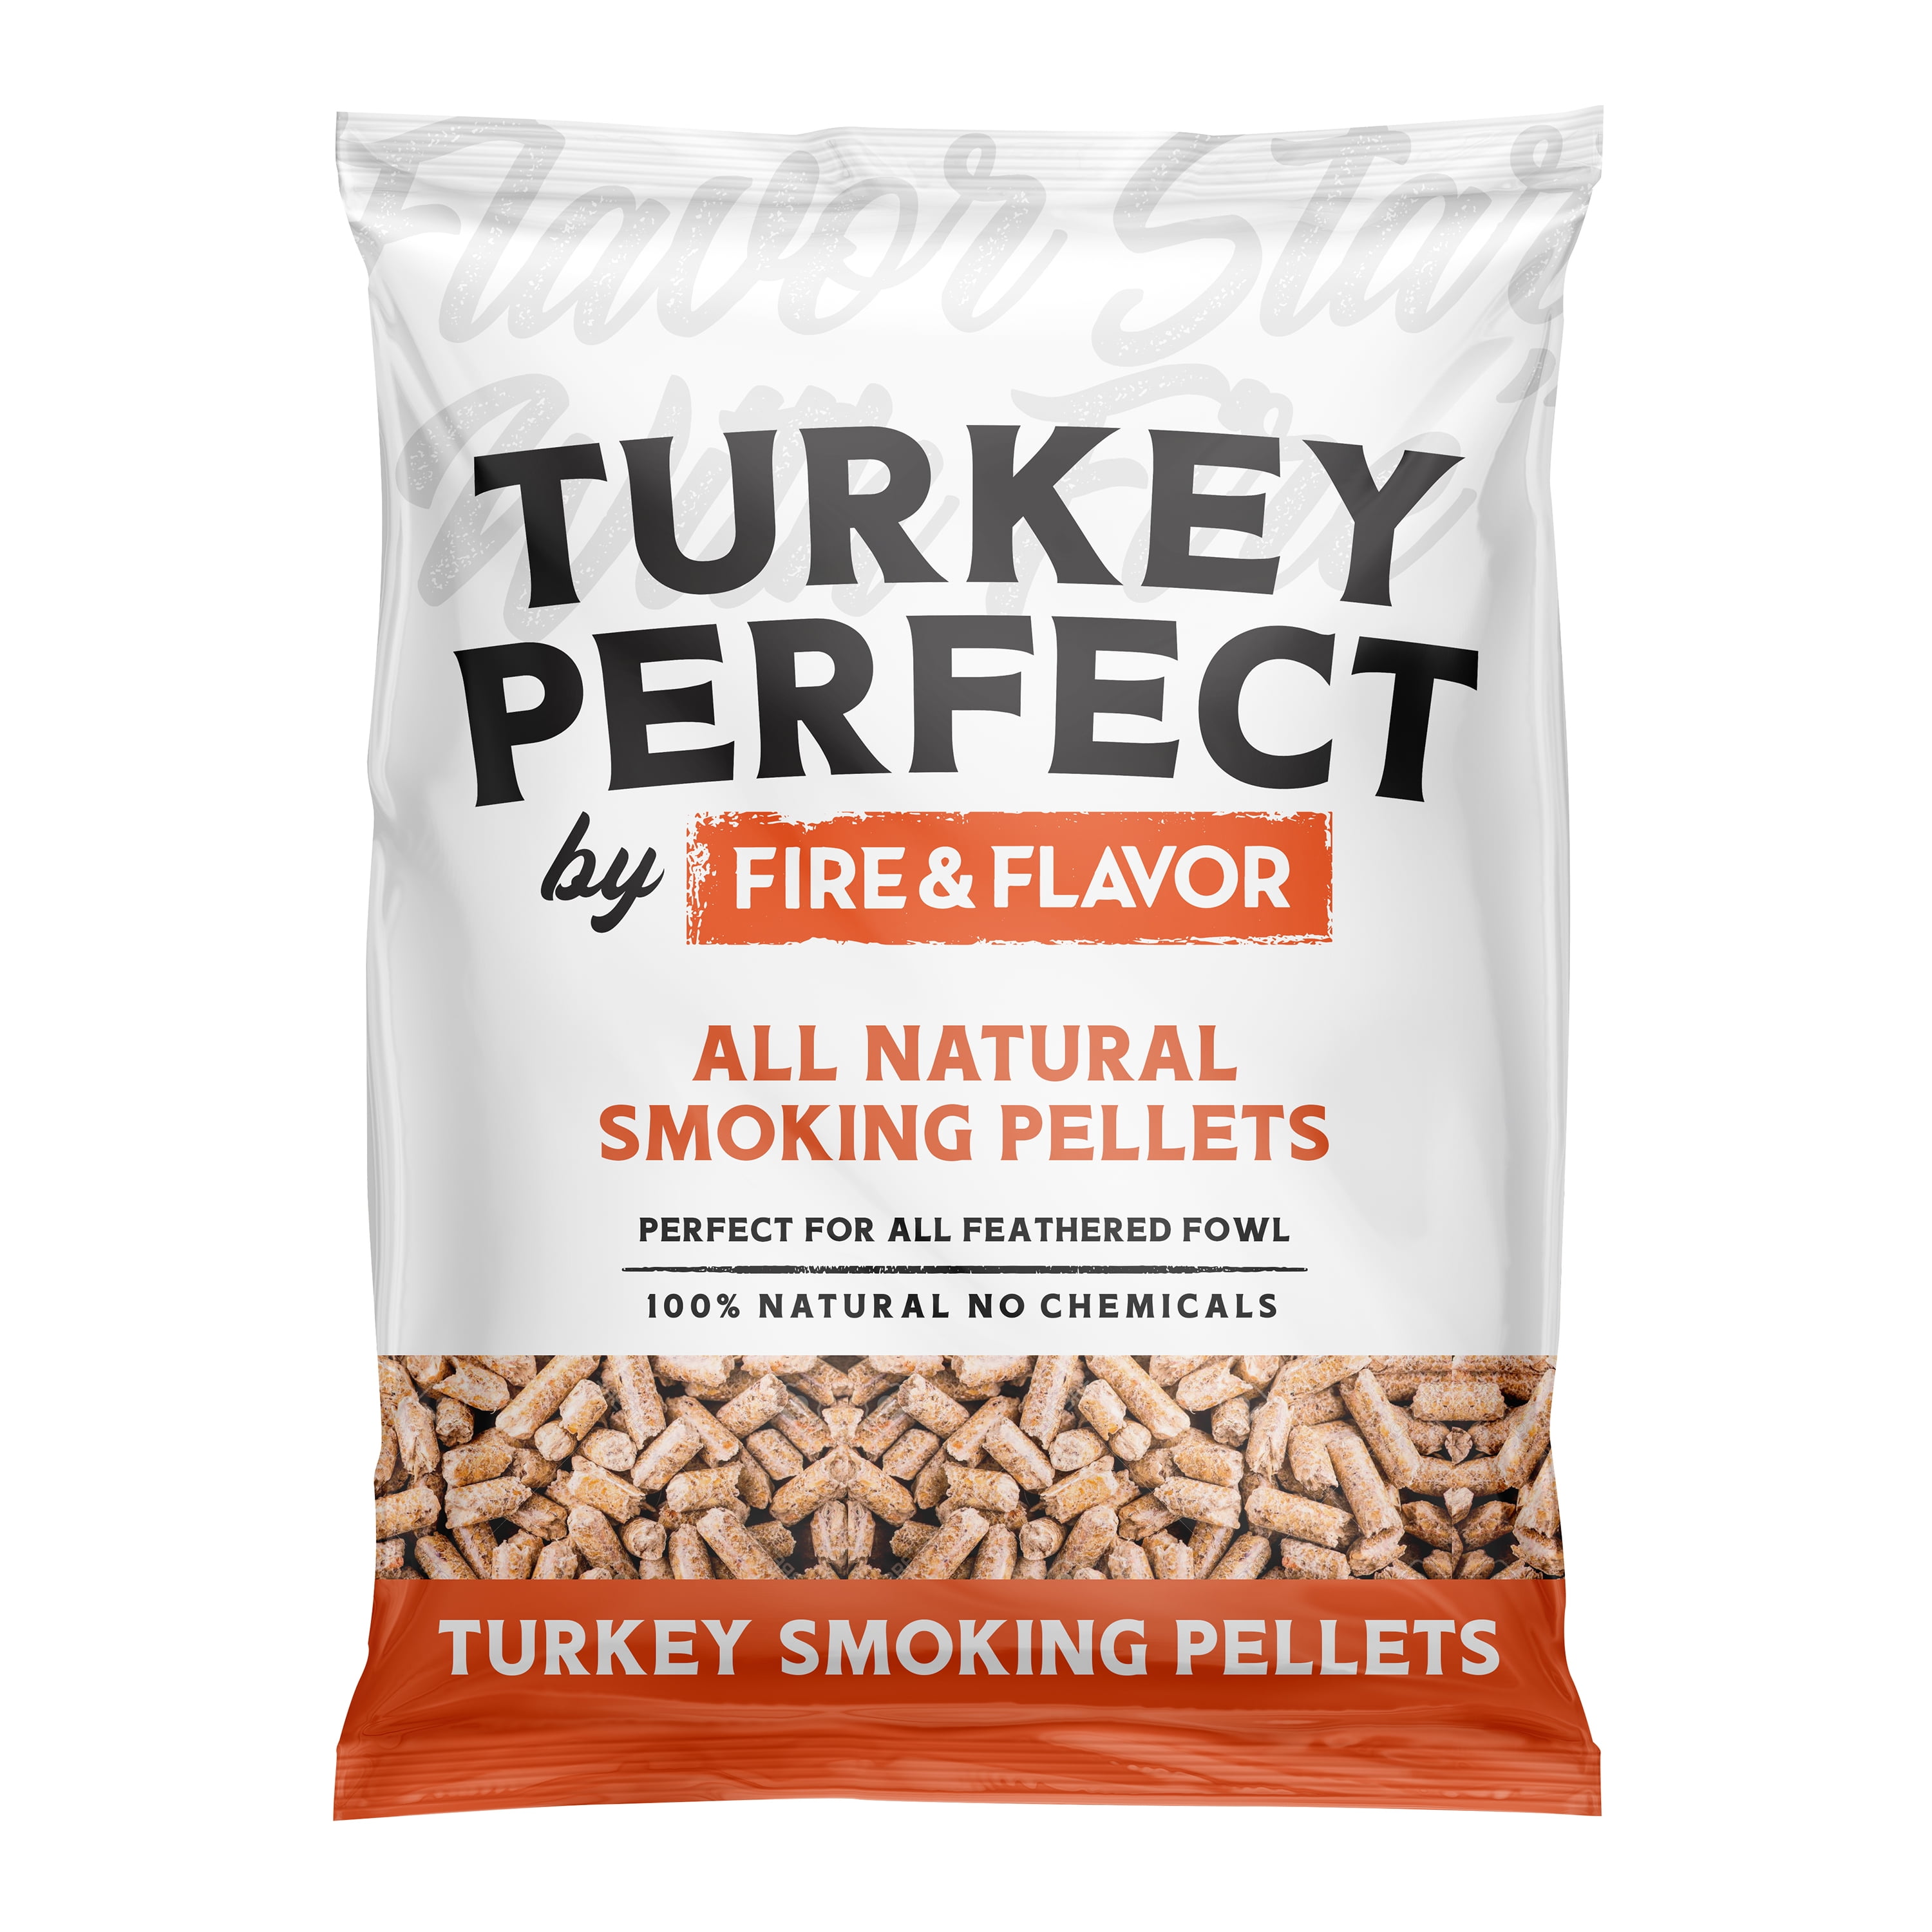 Must Have Accessories For Smoking a Turkey